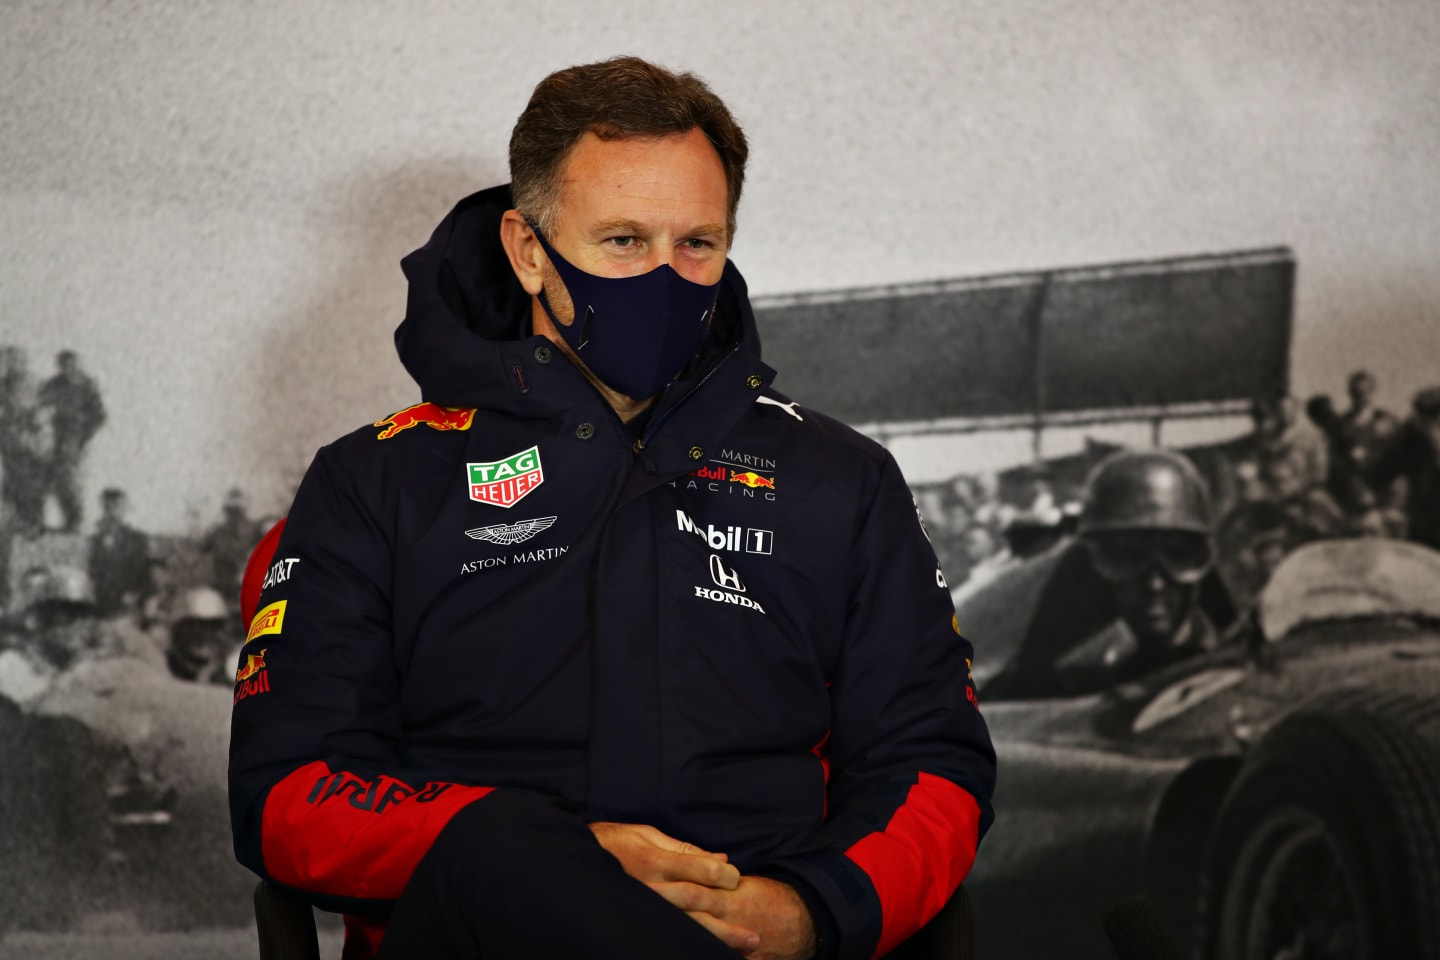 NUERBURG, GERMANY - OCTOBER 09: Red Bull Racing Team Principal Christian Horner talks in the Team Principals Press Conference during practice ahead of the F1 Eifel Grand Prix at Nuerburgring on October 09, 2020 in Nuerburg, Germany. (Photo by Joe Portlock/Getty Images)